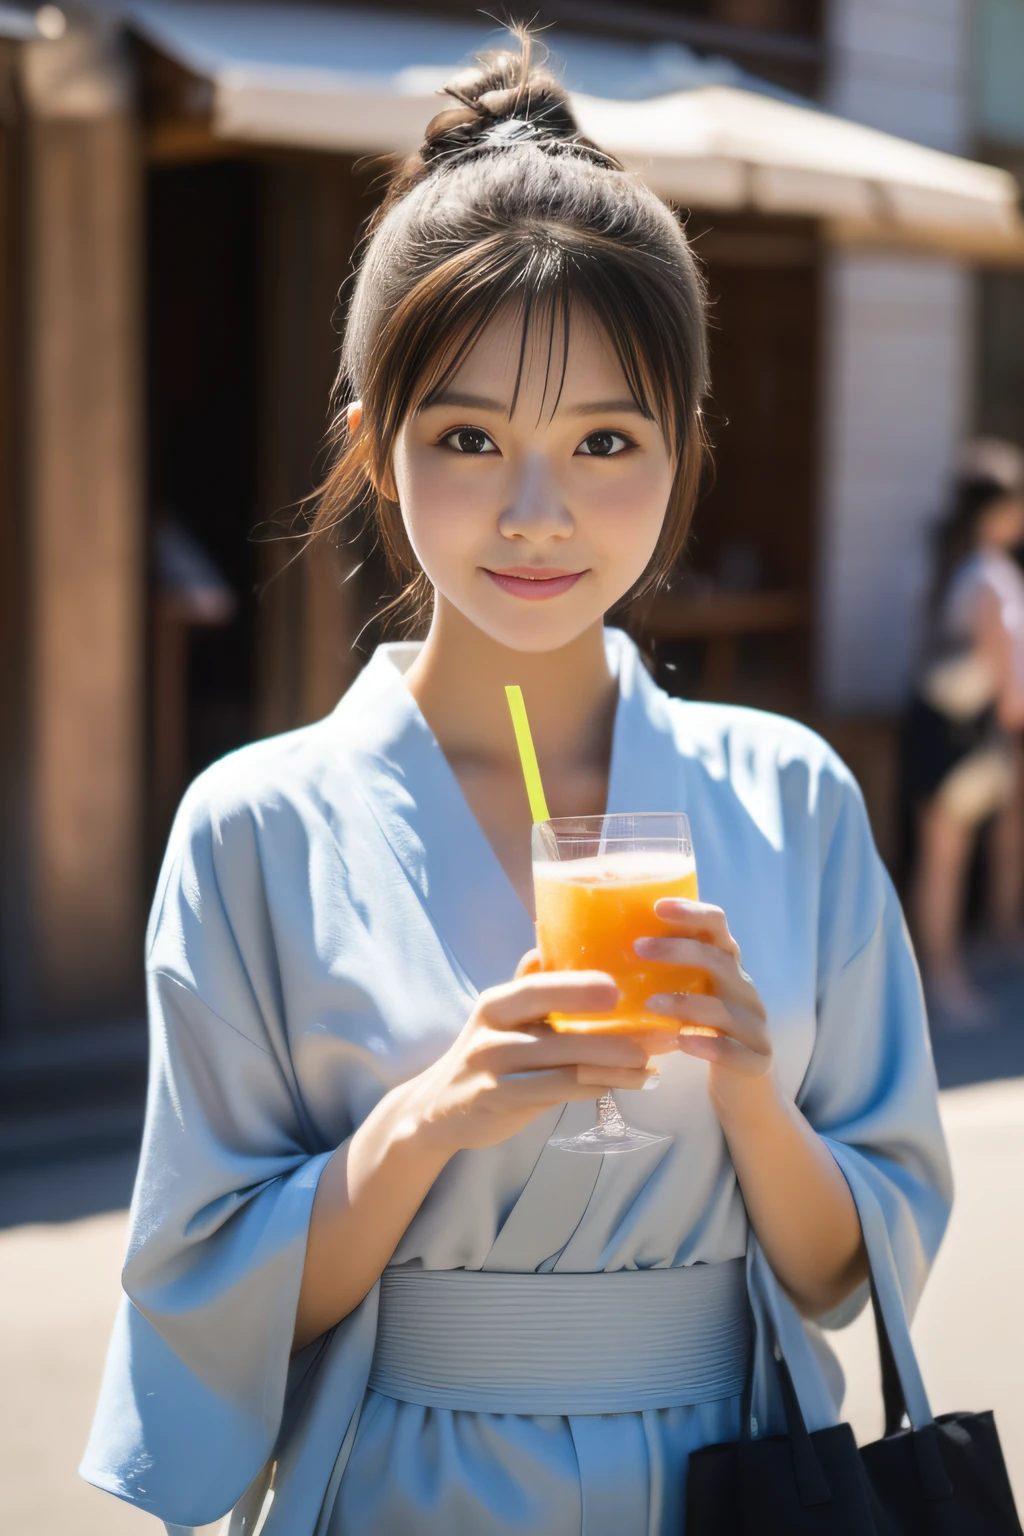 ((beste-Qualit))、((The ultra -The high-definition))finely detail、(((Beautiful One Girl)))、very detailed eyes and faces、Light-colored yukata、In the street、poneyTail、Drink juice